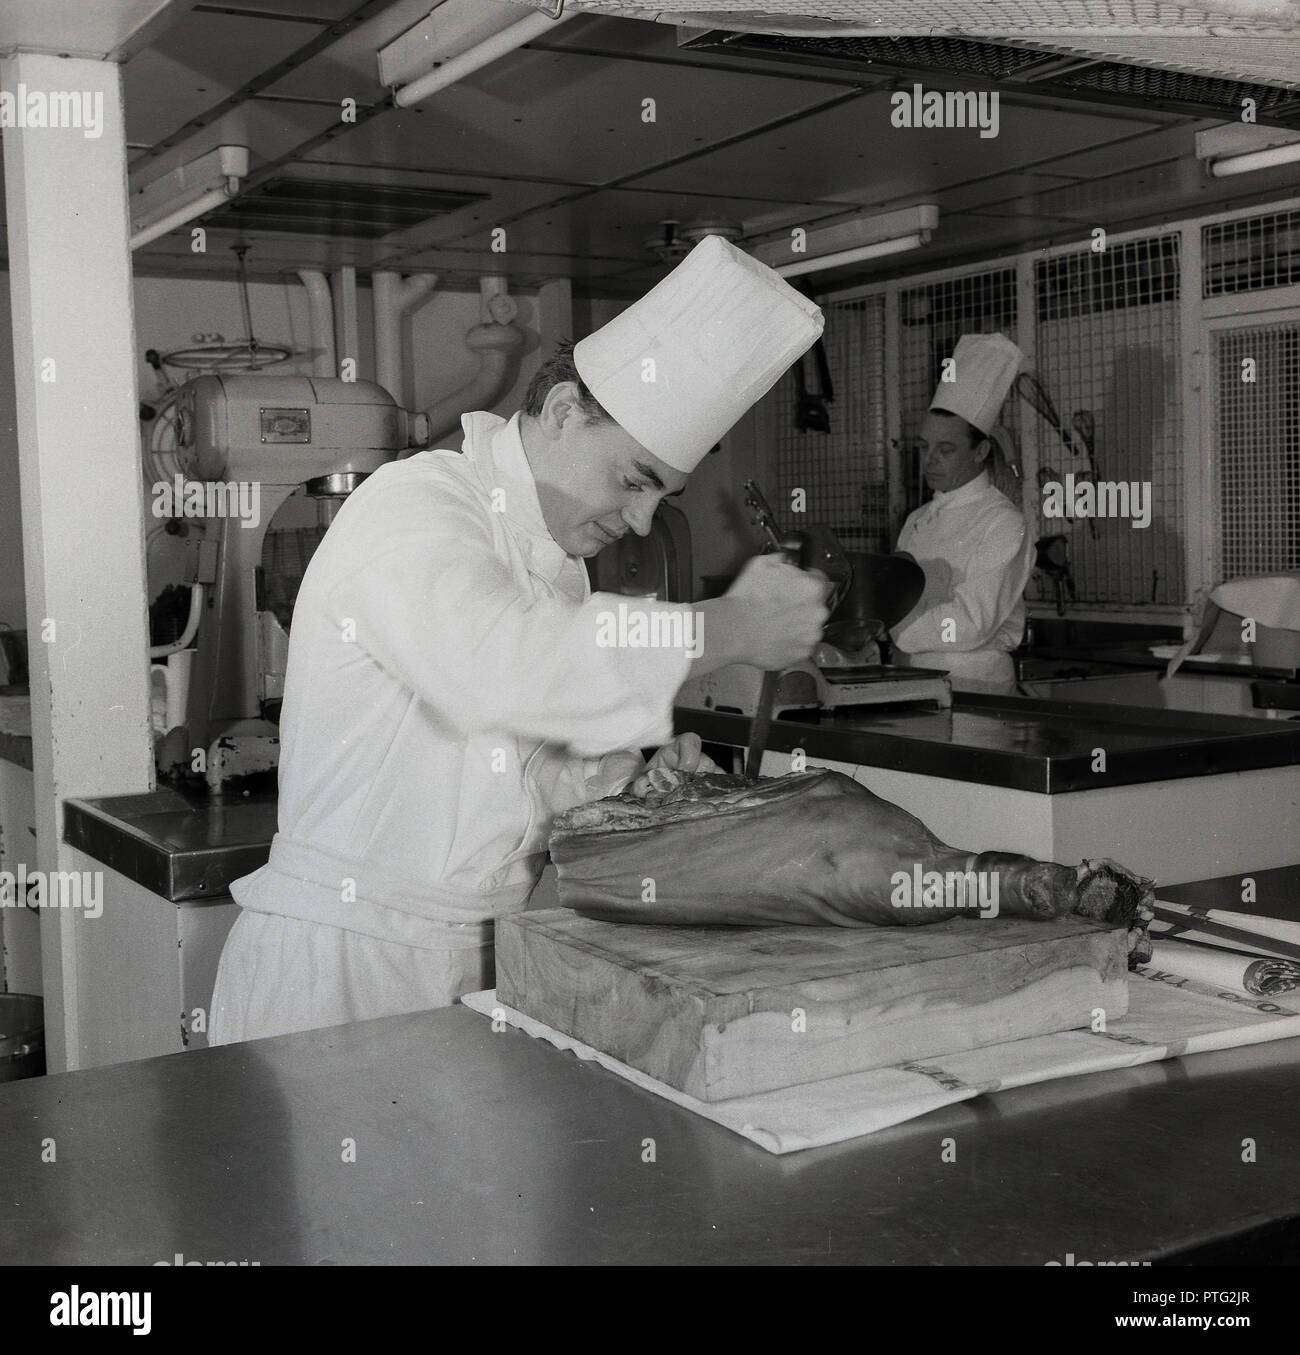 1950s, historical, male chef in uniform and tall hat or toque working in a kitchen below deck on a union-castle steamship, preparing a leg of serrano or cured ham on a wooden block. Stock Photo